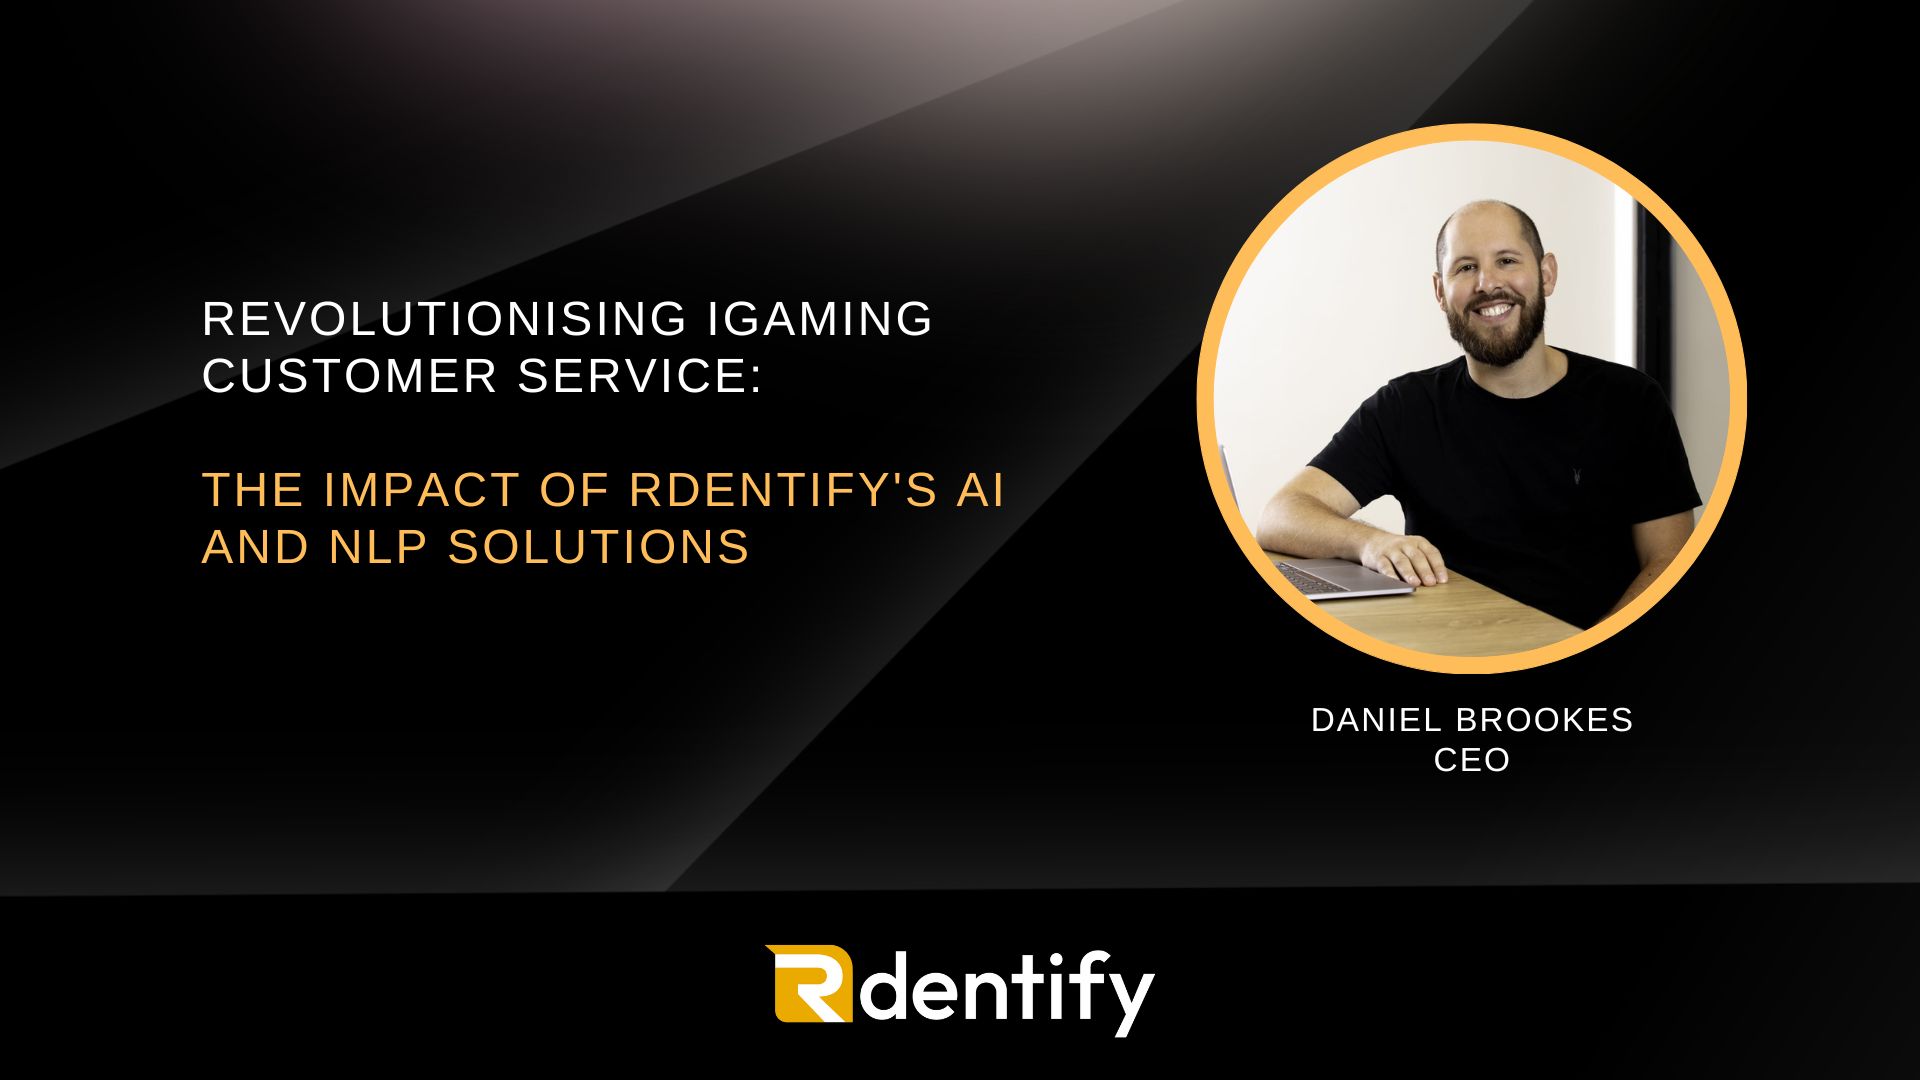 The Impact of Rdentify’s AI and NLP Solutions on Efficiency, Personalisation, and Responsible Gaming